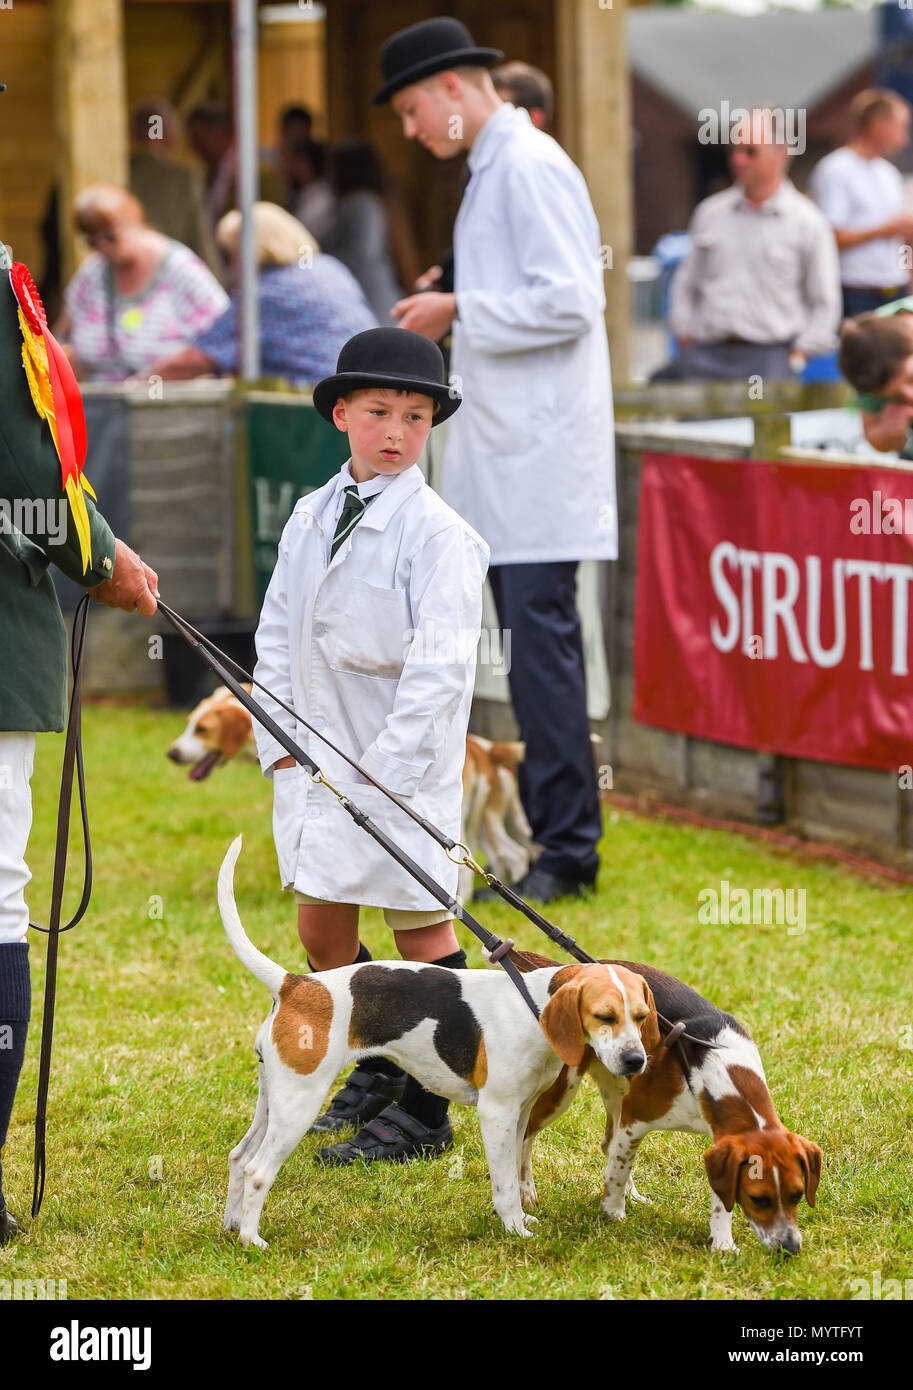 Ardingly Sussex UK 8th June 2018 - Young boy from the Trinity Foot & South Herts hounds competing with his father Matthew at the South of England Show in beautiful sunny weather held at the Ardingly Showground near Haywards Heath Sussex Photograph by Simon Dack Credit: Simon Dack/Alamy Live News Stock Photo